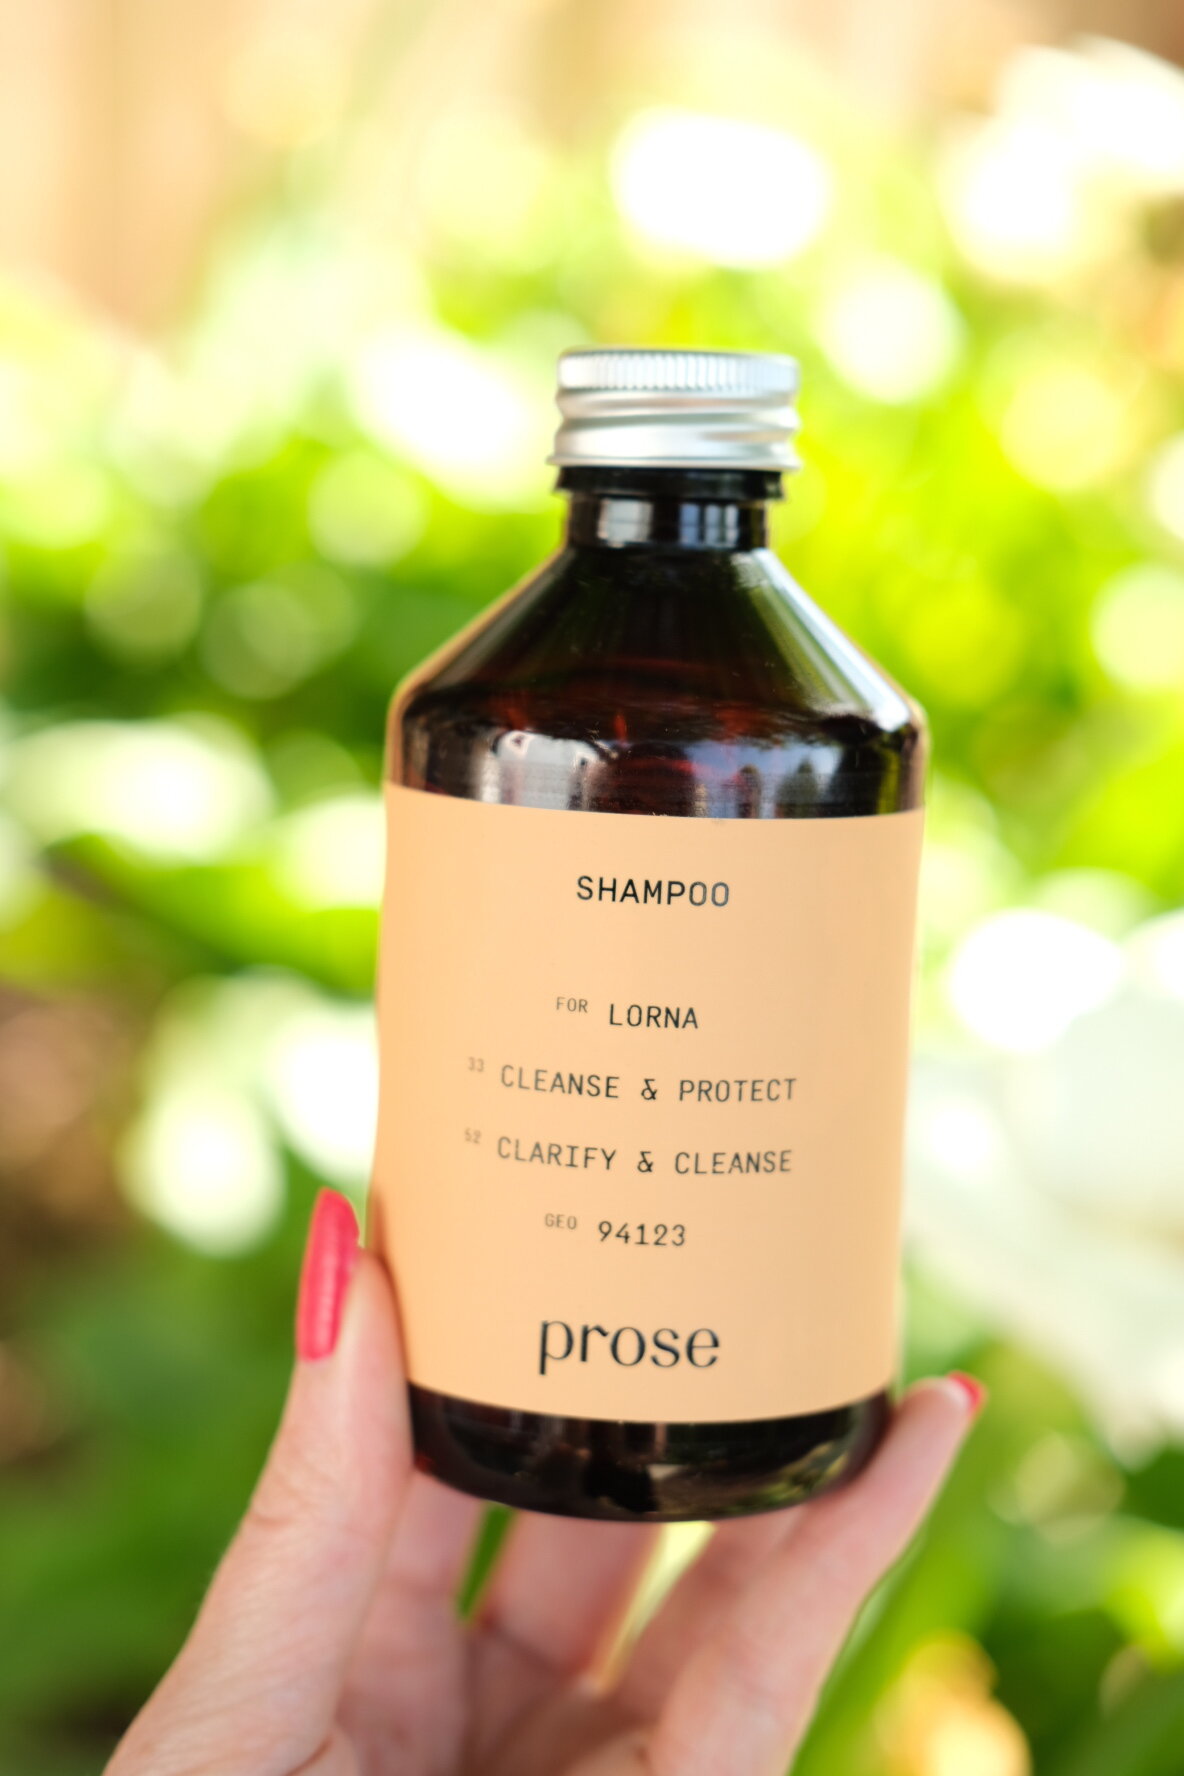 Looking for Prose reviews? Want to know is Prose worth it? Are you deciding what Prose scent to choose? Want to know how much Prose hair care costs? Looking for all the details in honest Prose Shampoo Reviews?  Read this blog post for my full Prose h